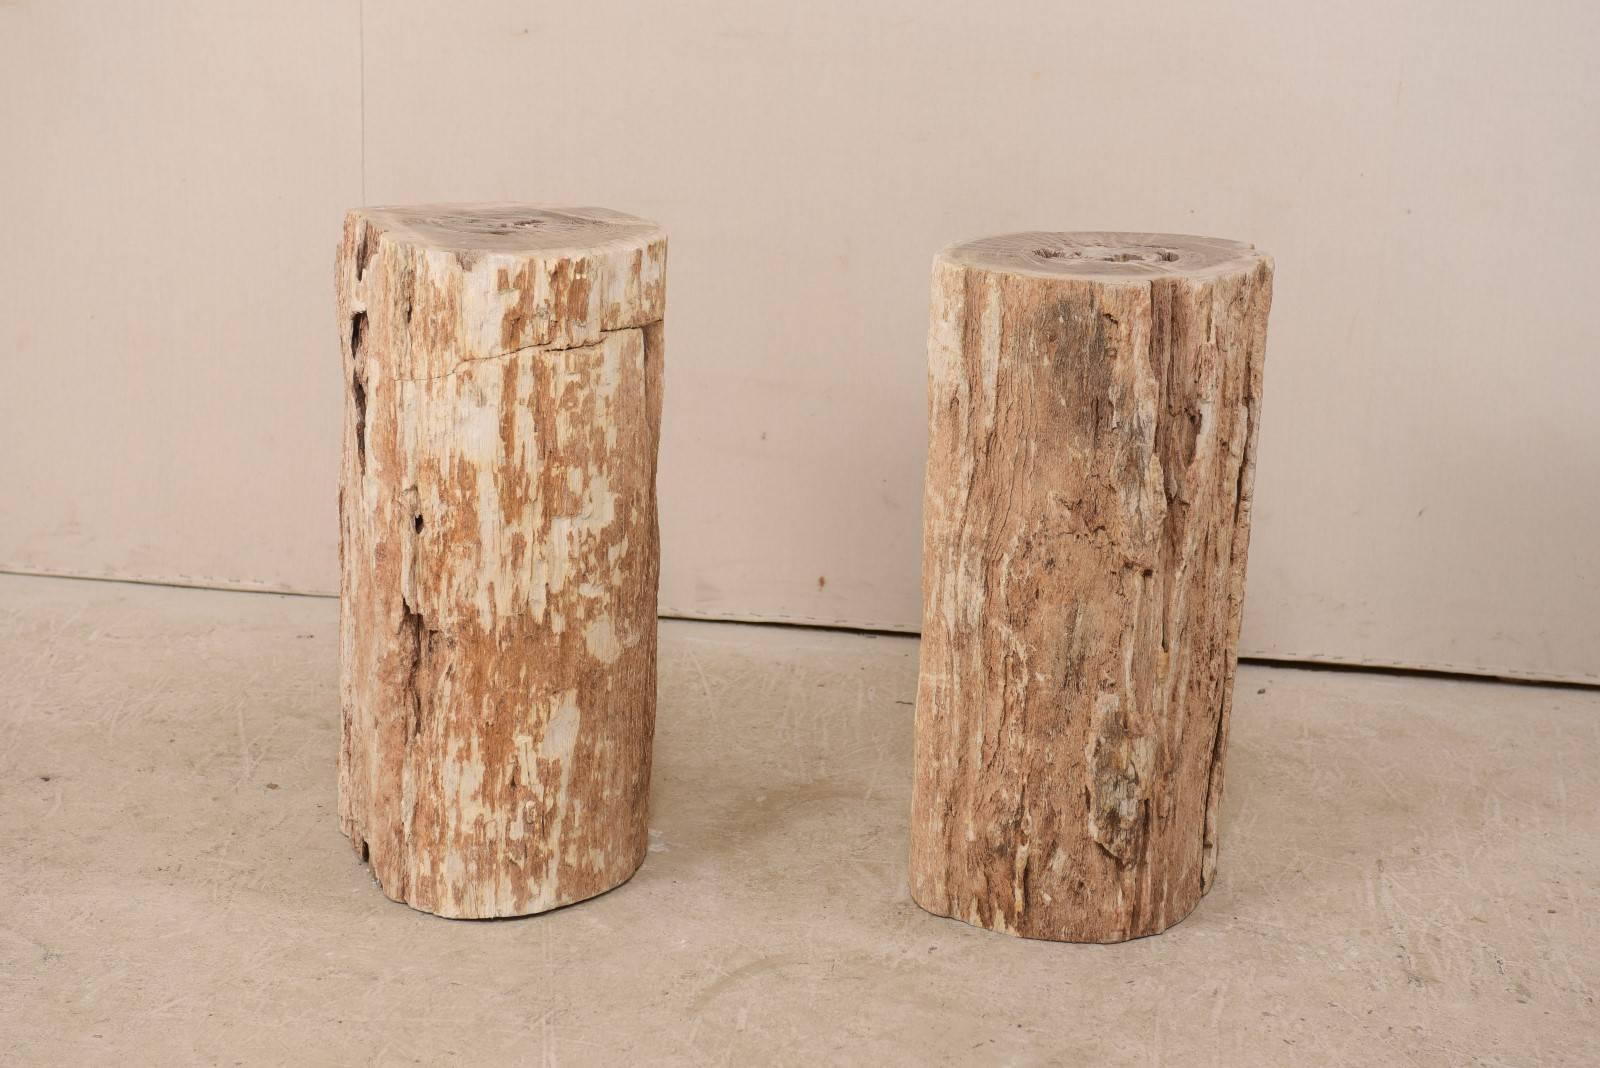 A pair of petrified wood pedestal tables. This pair of petrified wood pedestals are a warm beige with rust and bone. While the sides show a rougher finish, the tops have been polished. Petrified wood is a fossil. Over time, the petrified wood